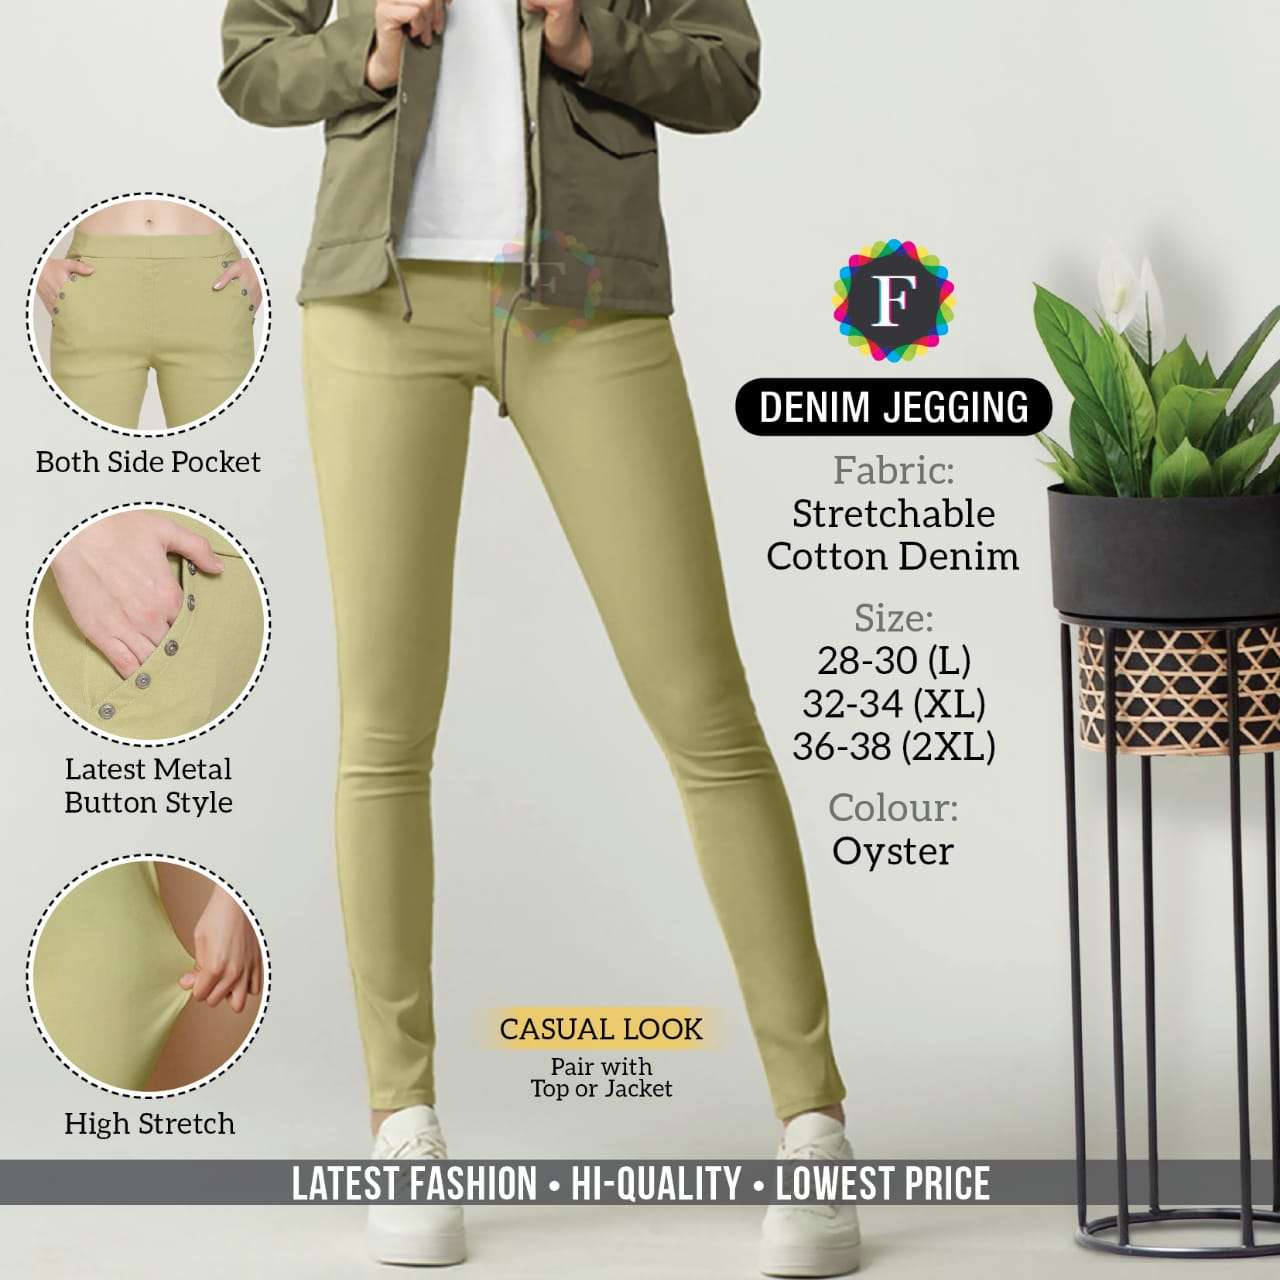 DENIM JEGGING BY KAAMIRI 01 TO 03 SERIES BEAUTIFUL STYLISH FANCY COLORFUL READY TO WEAR & CASUAL WEAR STRETCHABLE COTTON JEGGINGS AT WHOLESALE PRICE